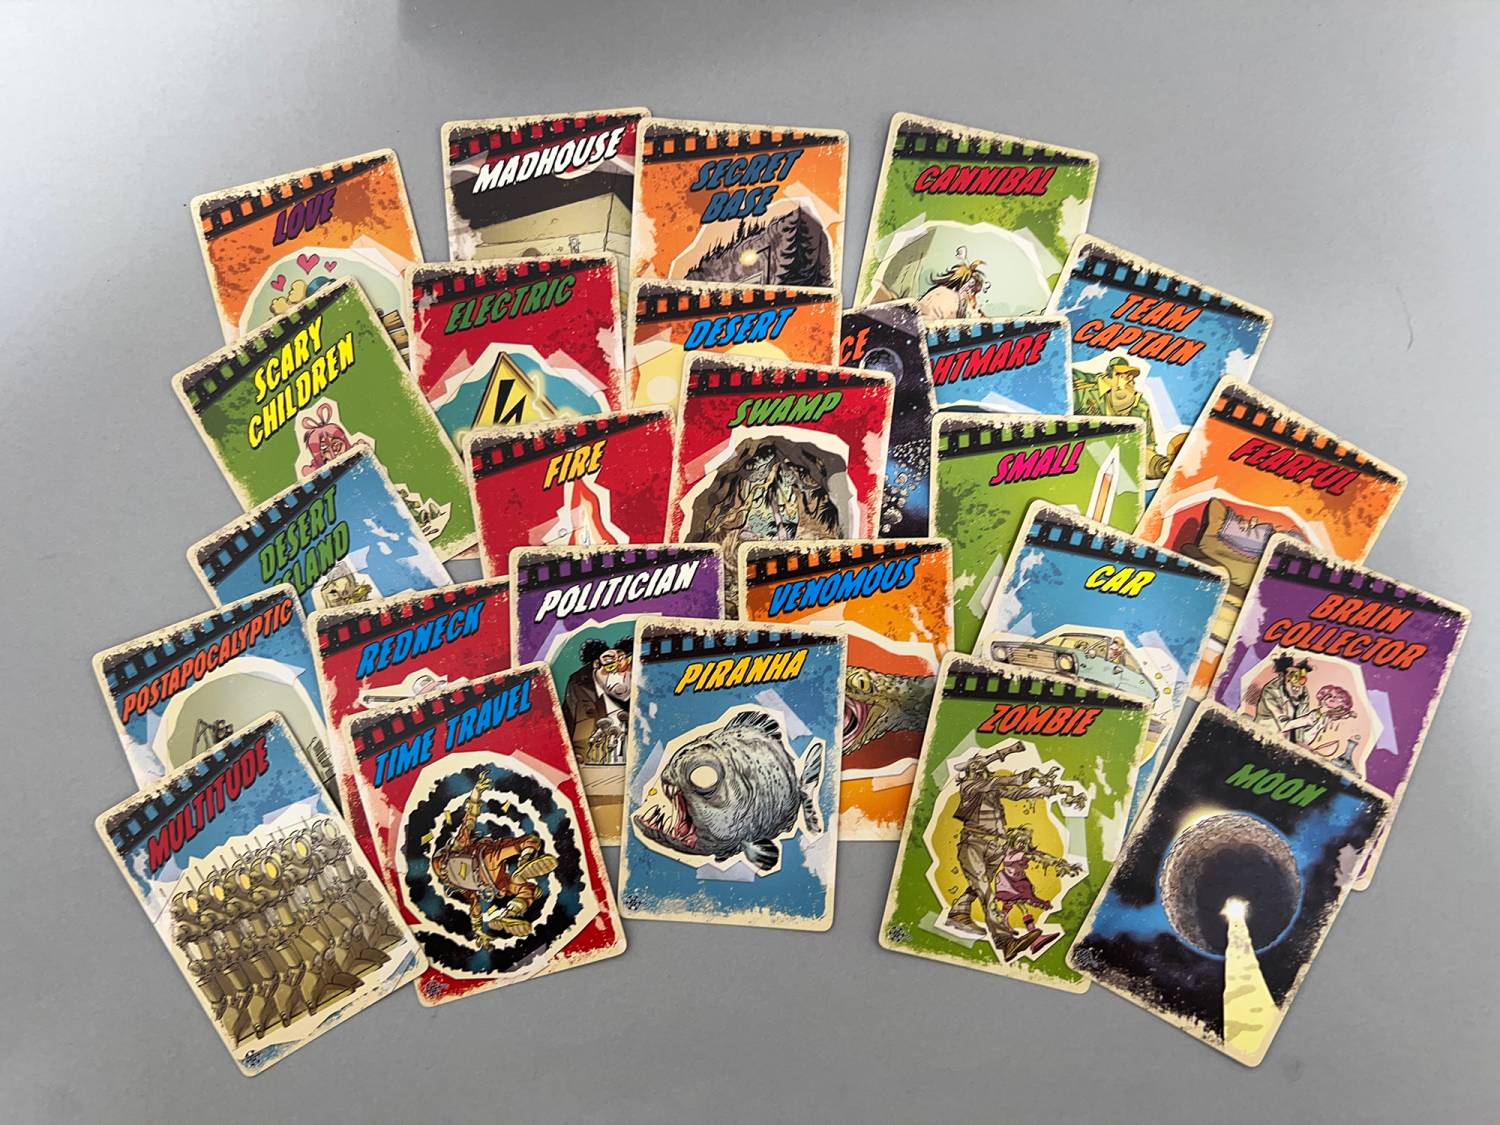 A sample of the cards in B Movie.